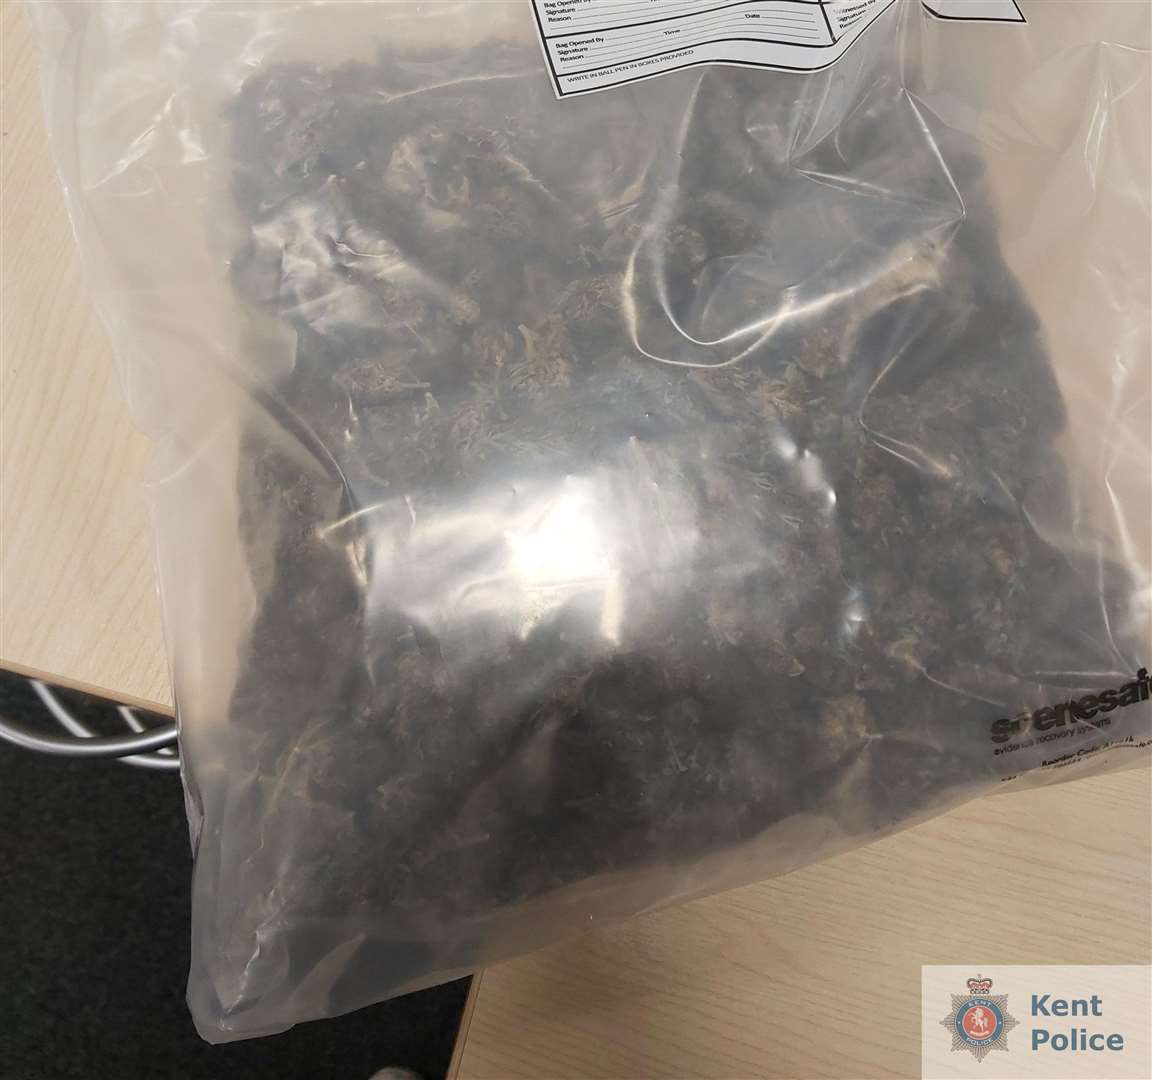 Cannabis seized from a house in Gravesend